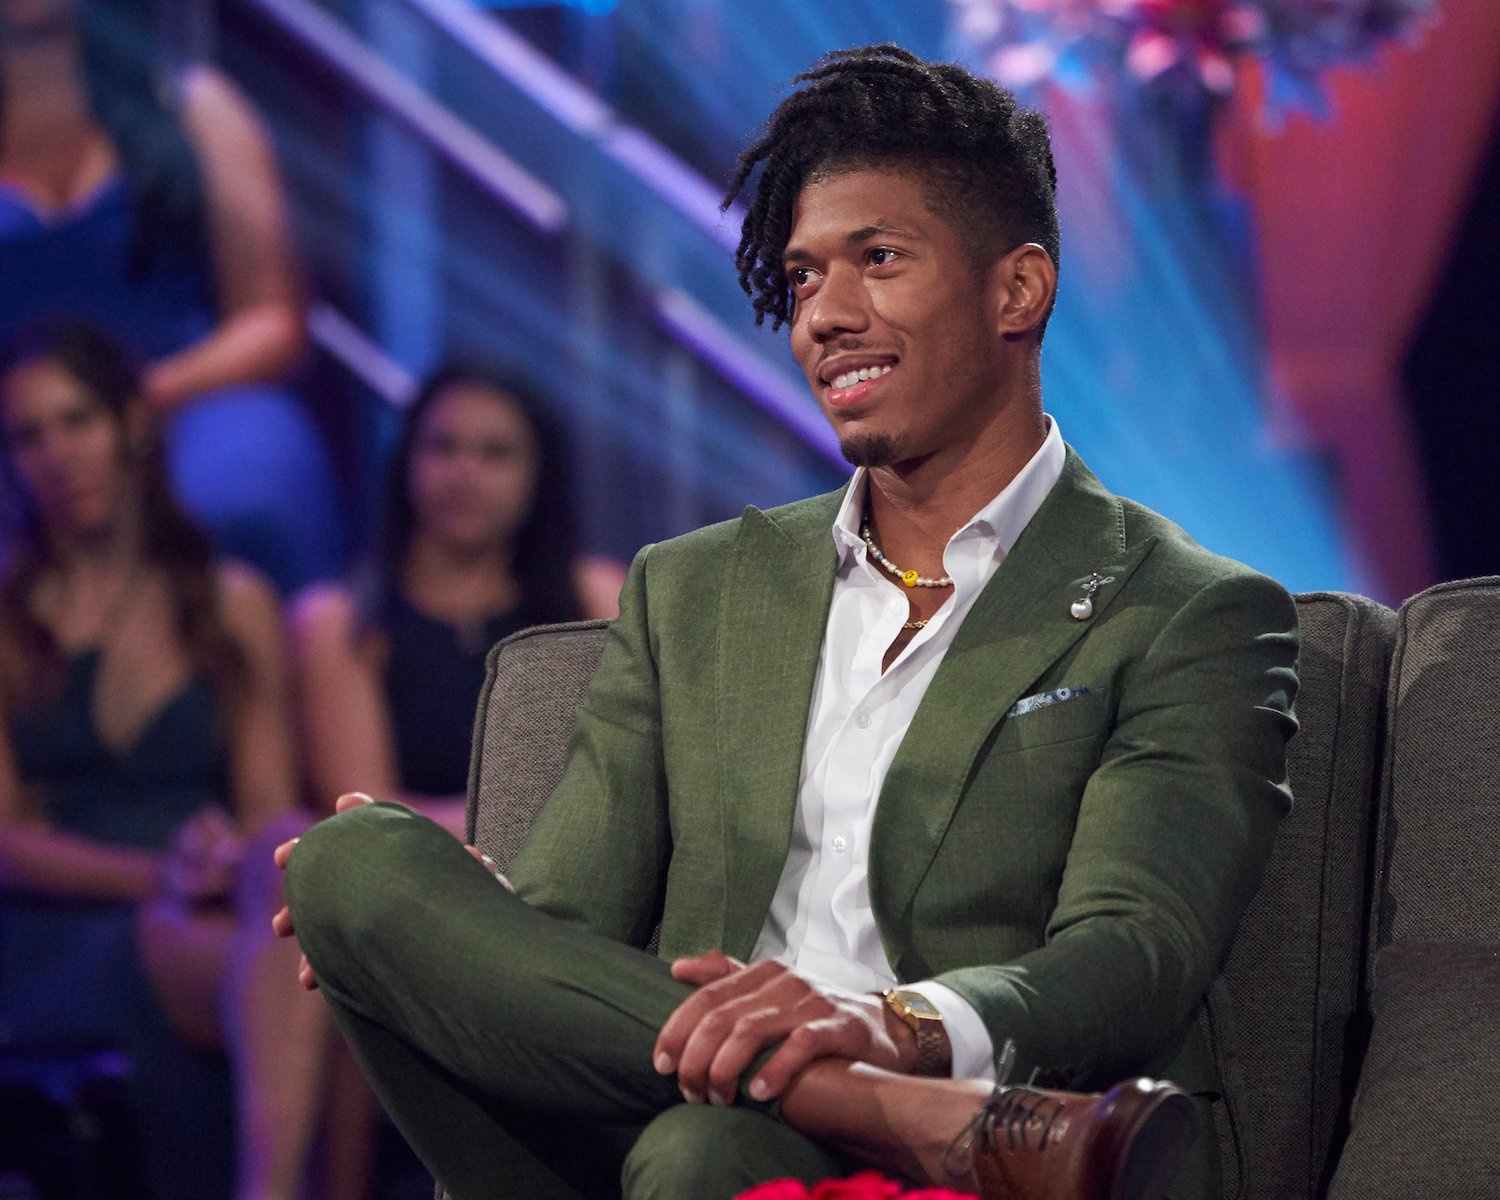 Nate Mitchell on 'The Bachelorette' Season 19 Men Tell All stage